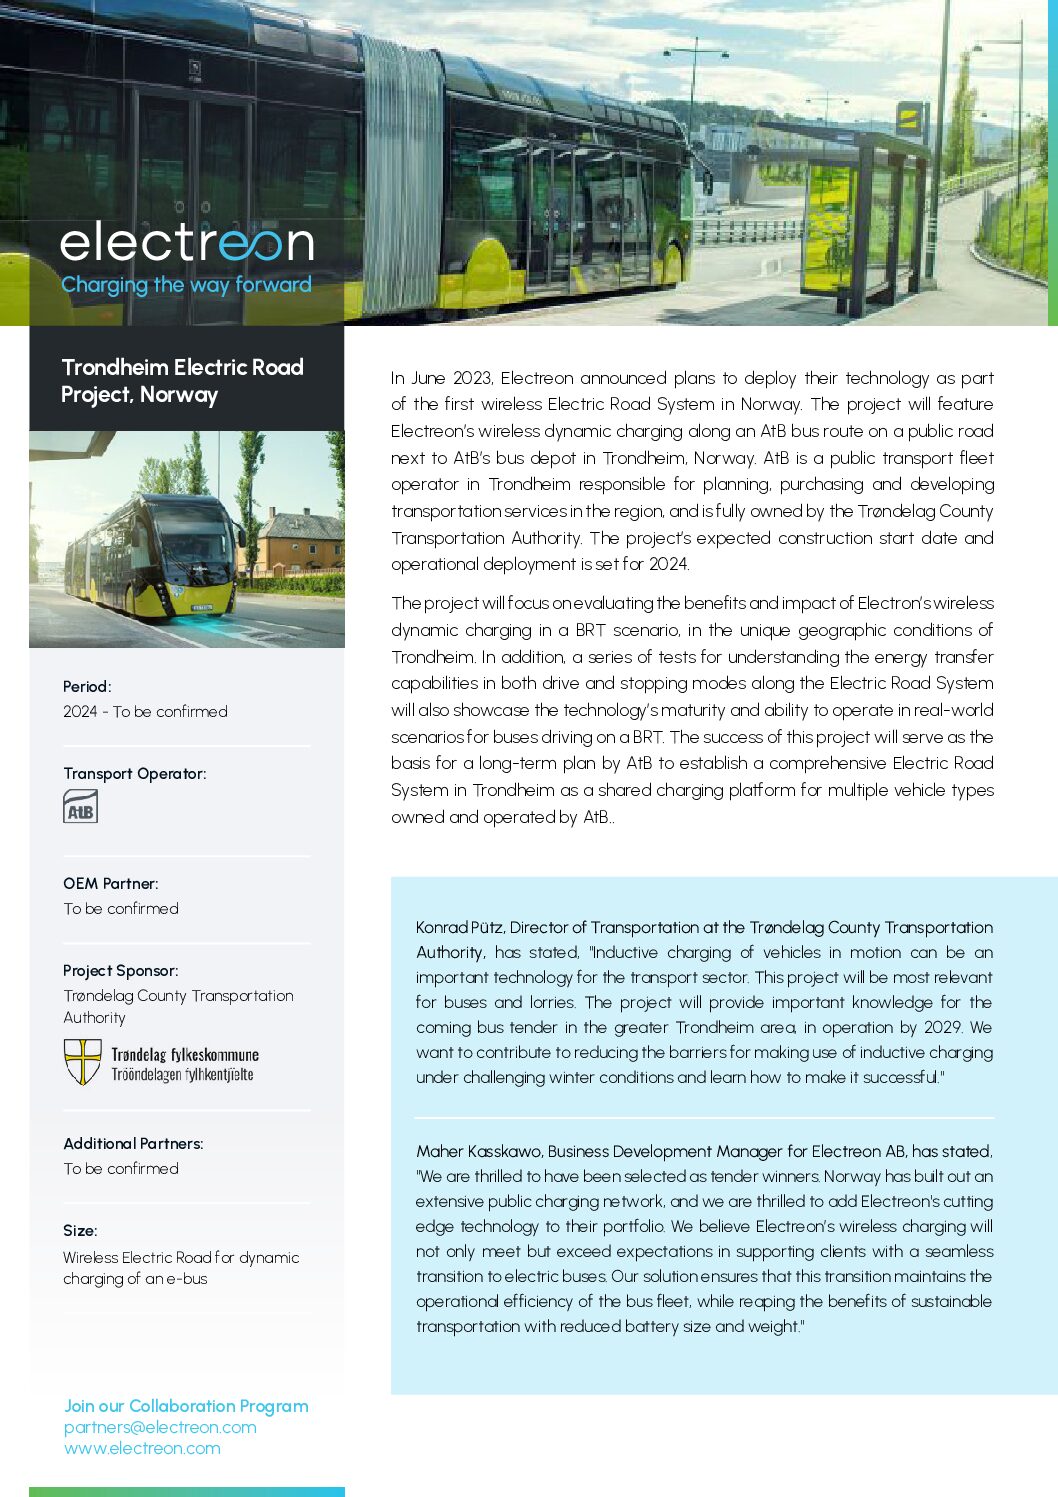 Electreon: Trondheim Electric Road Project, Norway